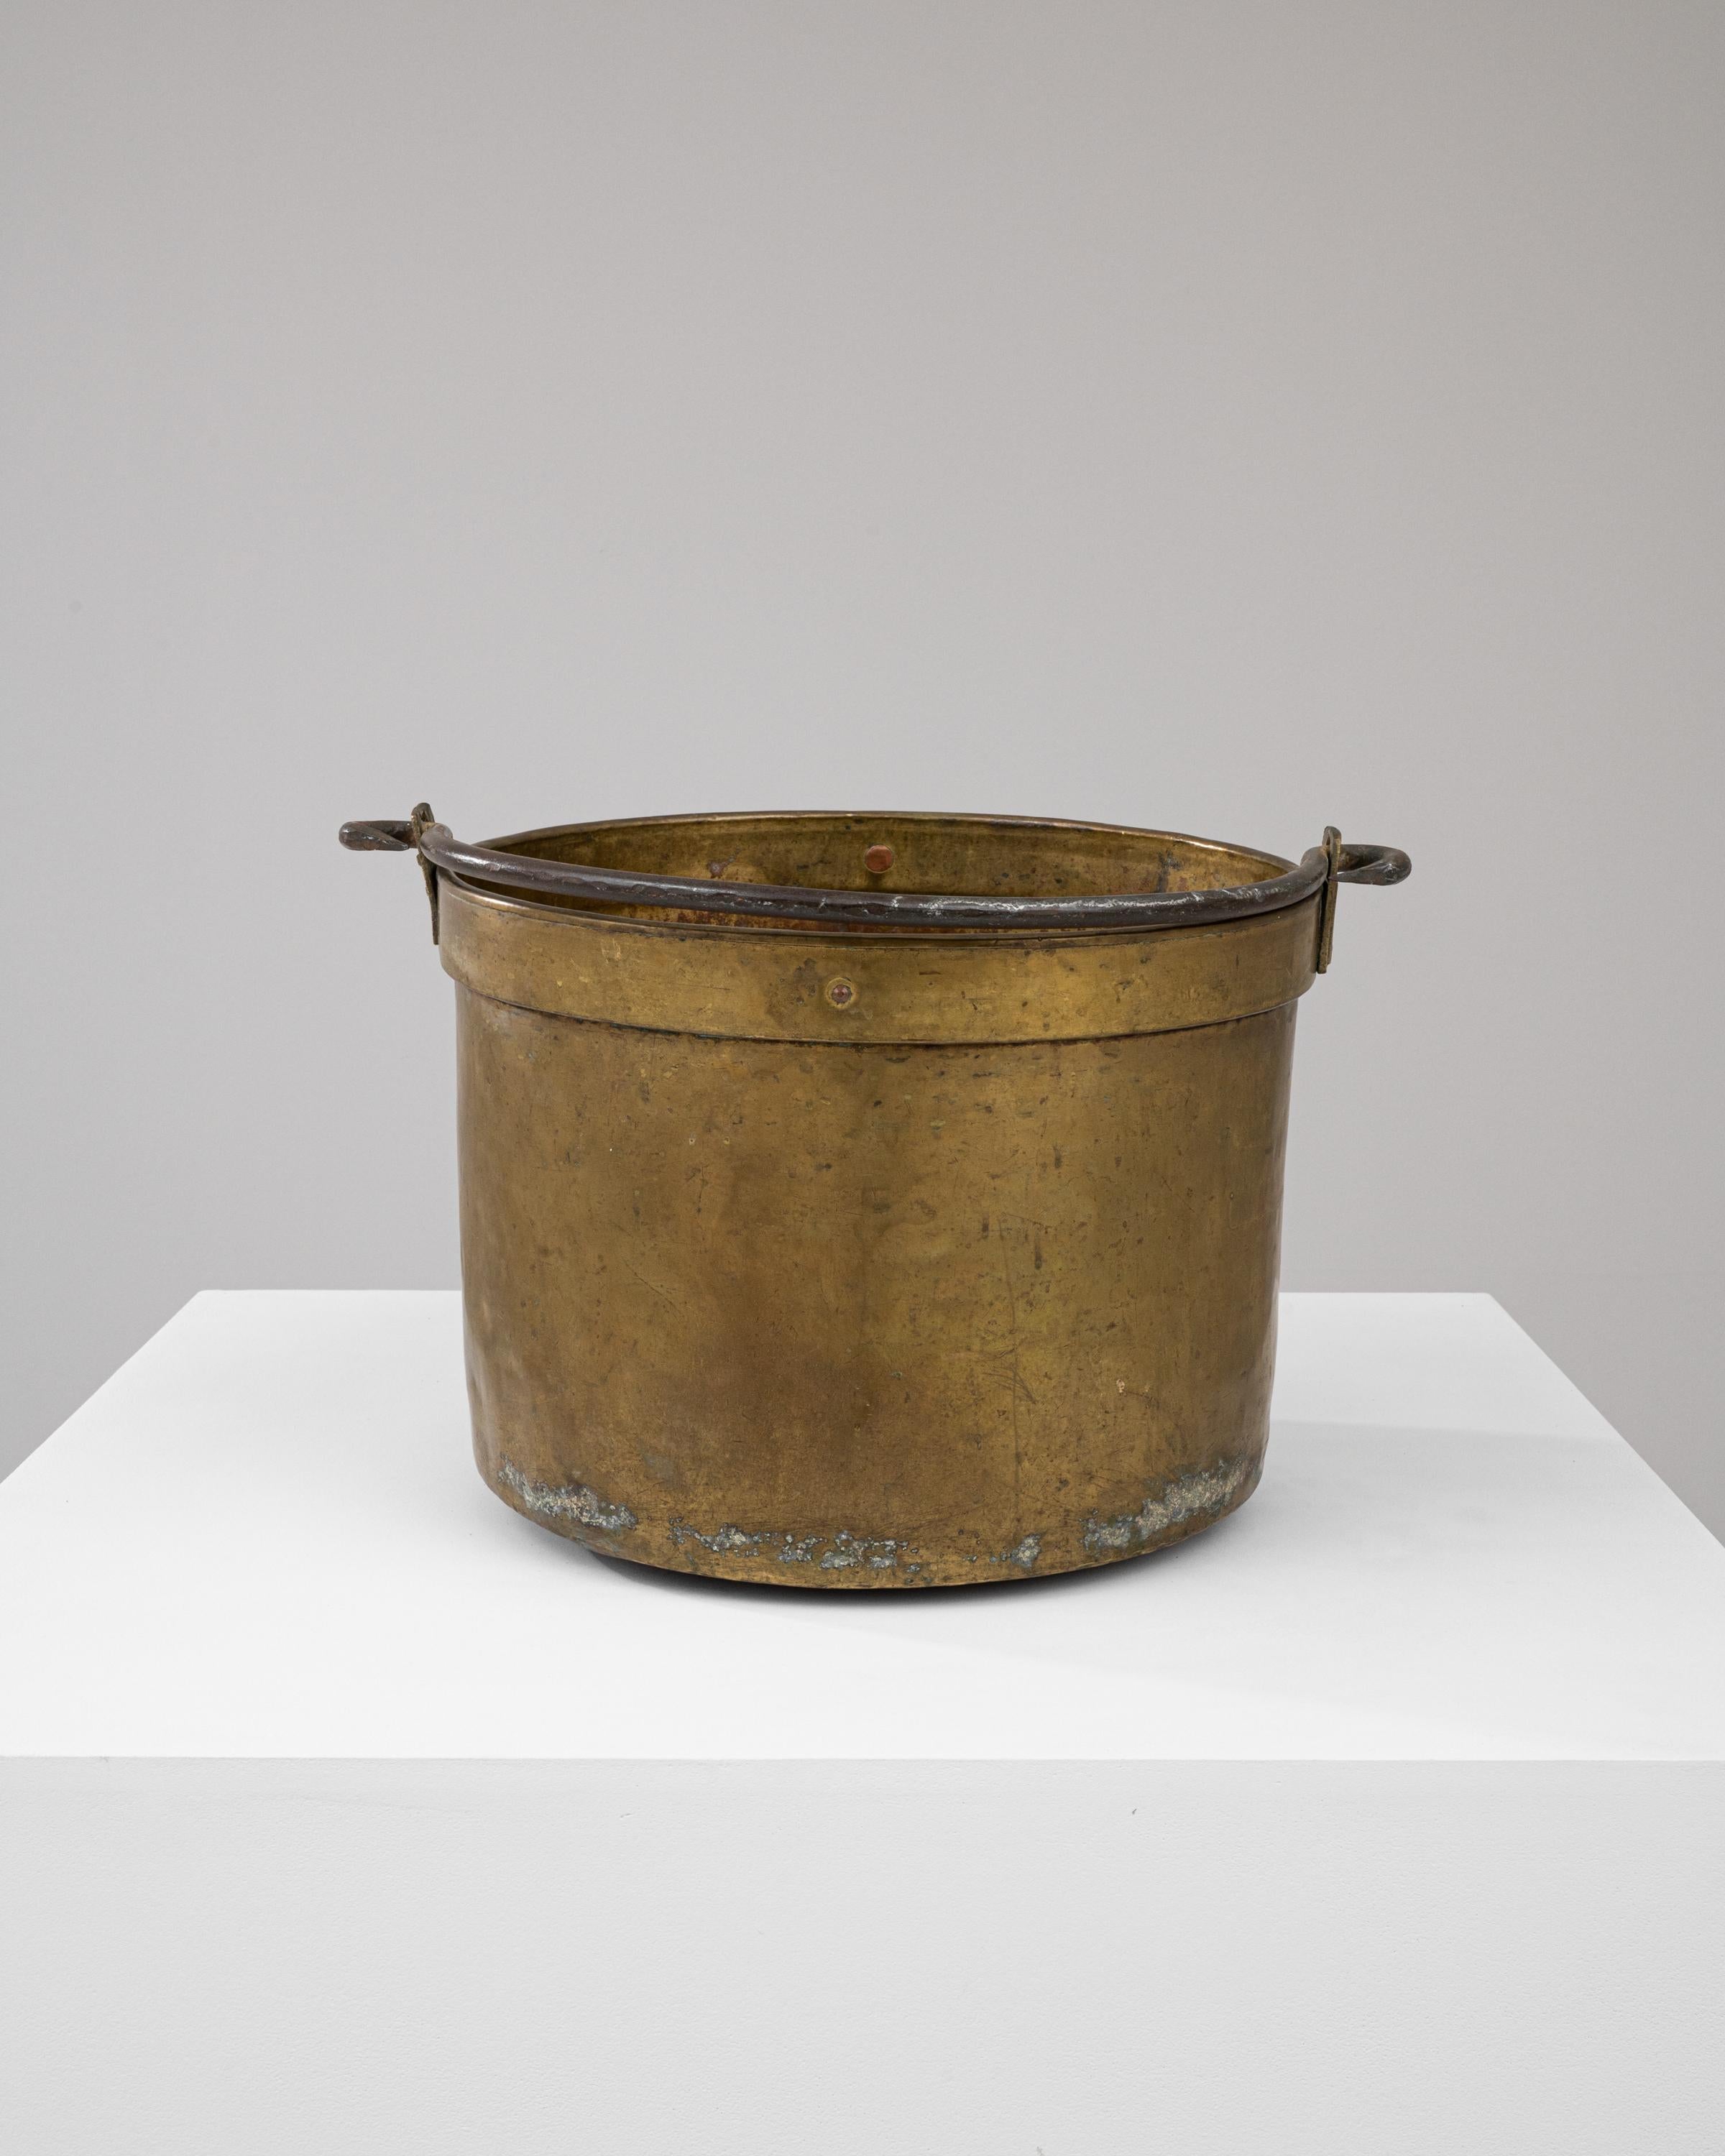 This early 19th Century Brass Bucket exudes a rich history and functional simplicity. Constructed from high-quality brass, its sturdy, cylindrical form is designed to endure the rigors of time. The surface showcases an exquisite patina that only